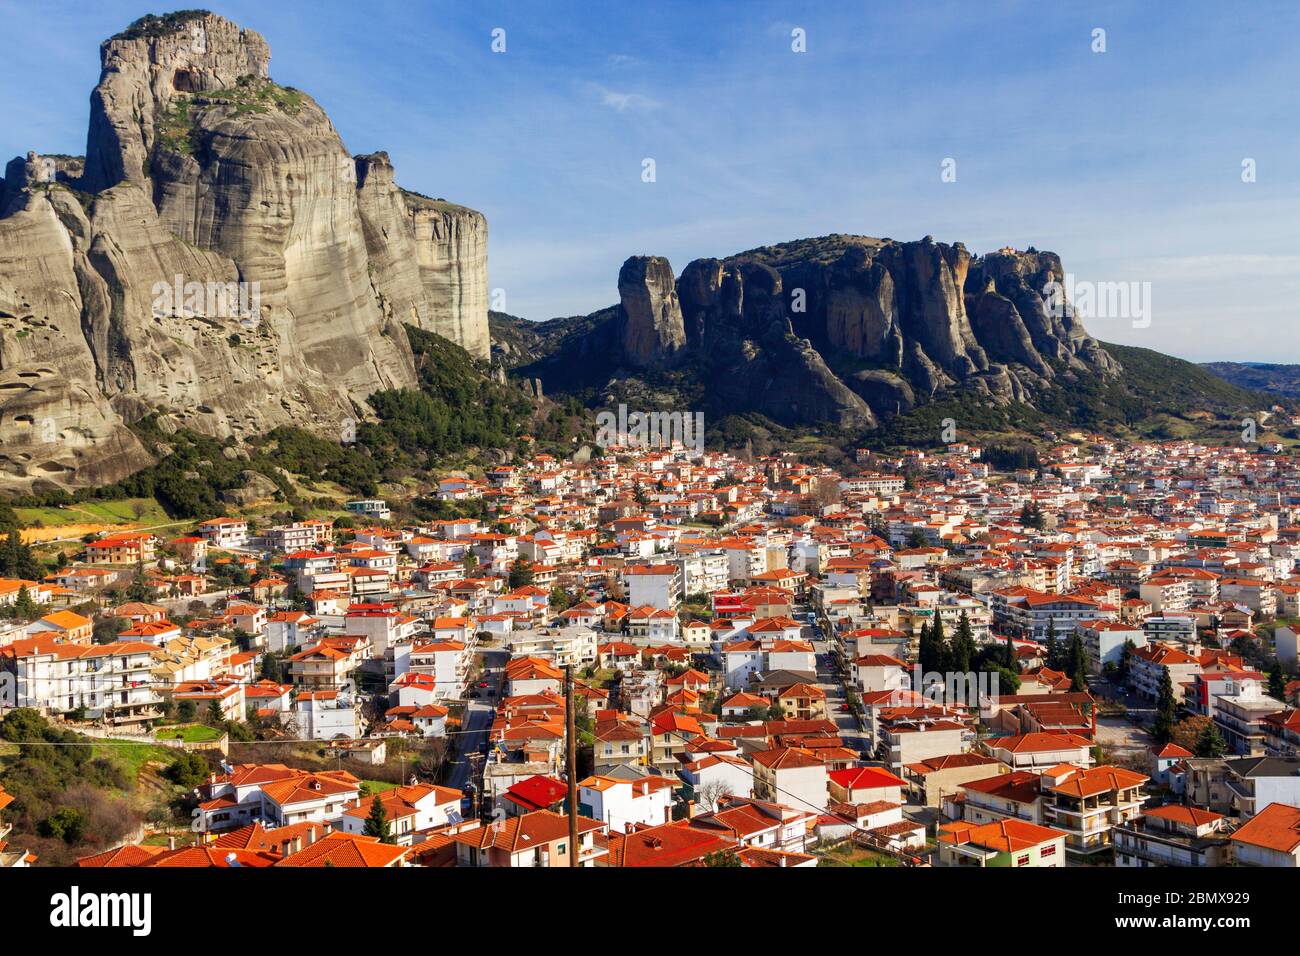 The town of Kalampaka, below the holy rock hills of Meteora, in Trikala  region, Thessaly, Greece Stock Photo - Alamy